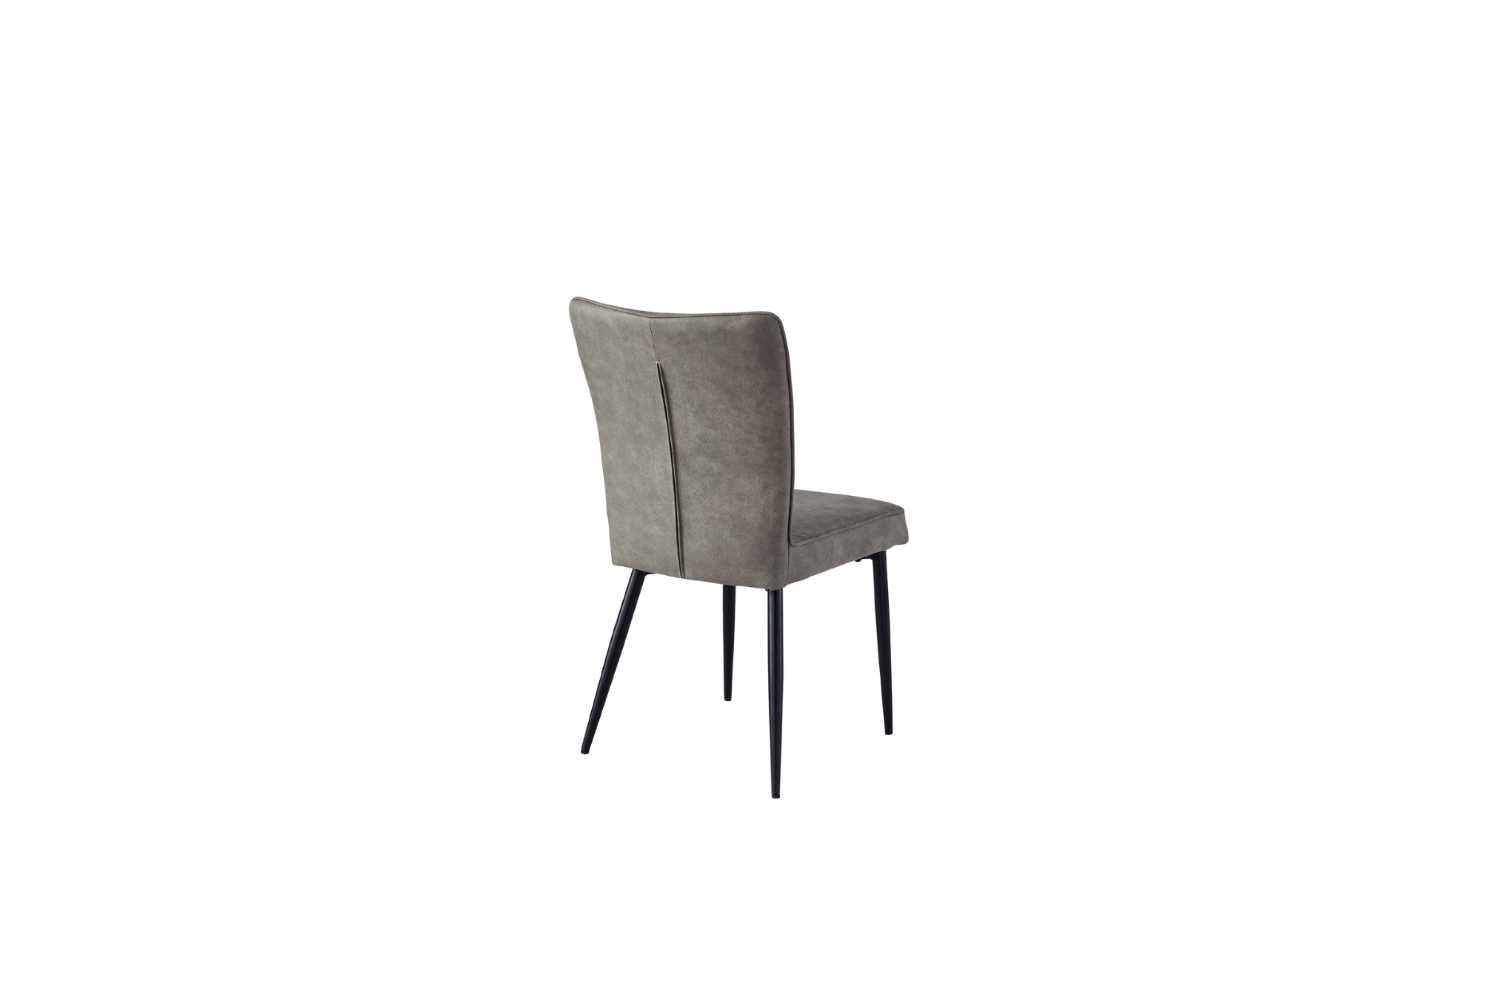 Leander Dining Collection Grey 5915